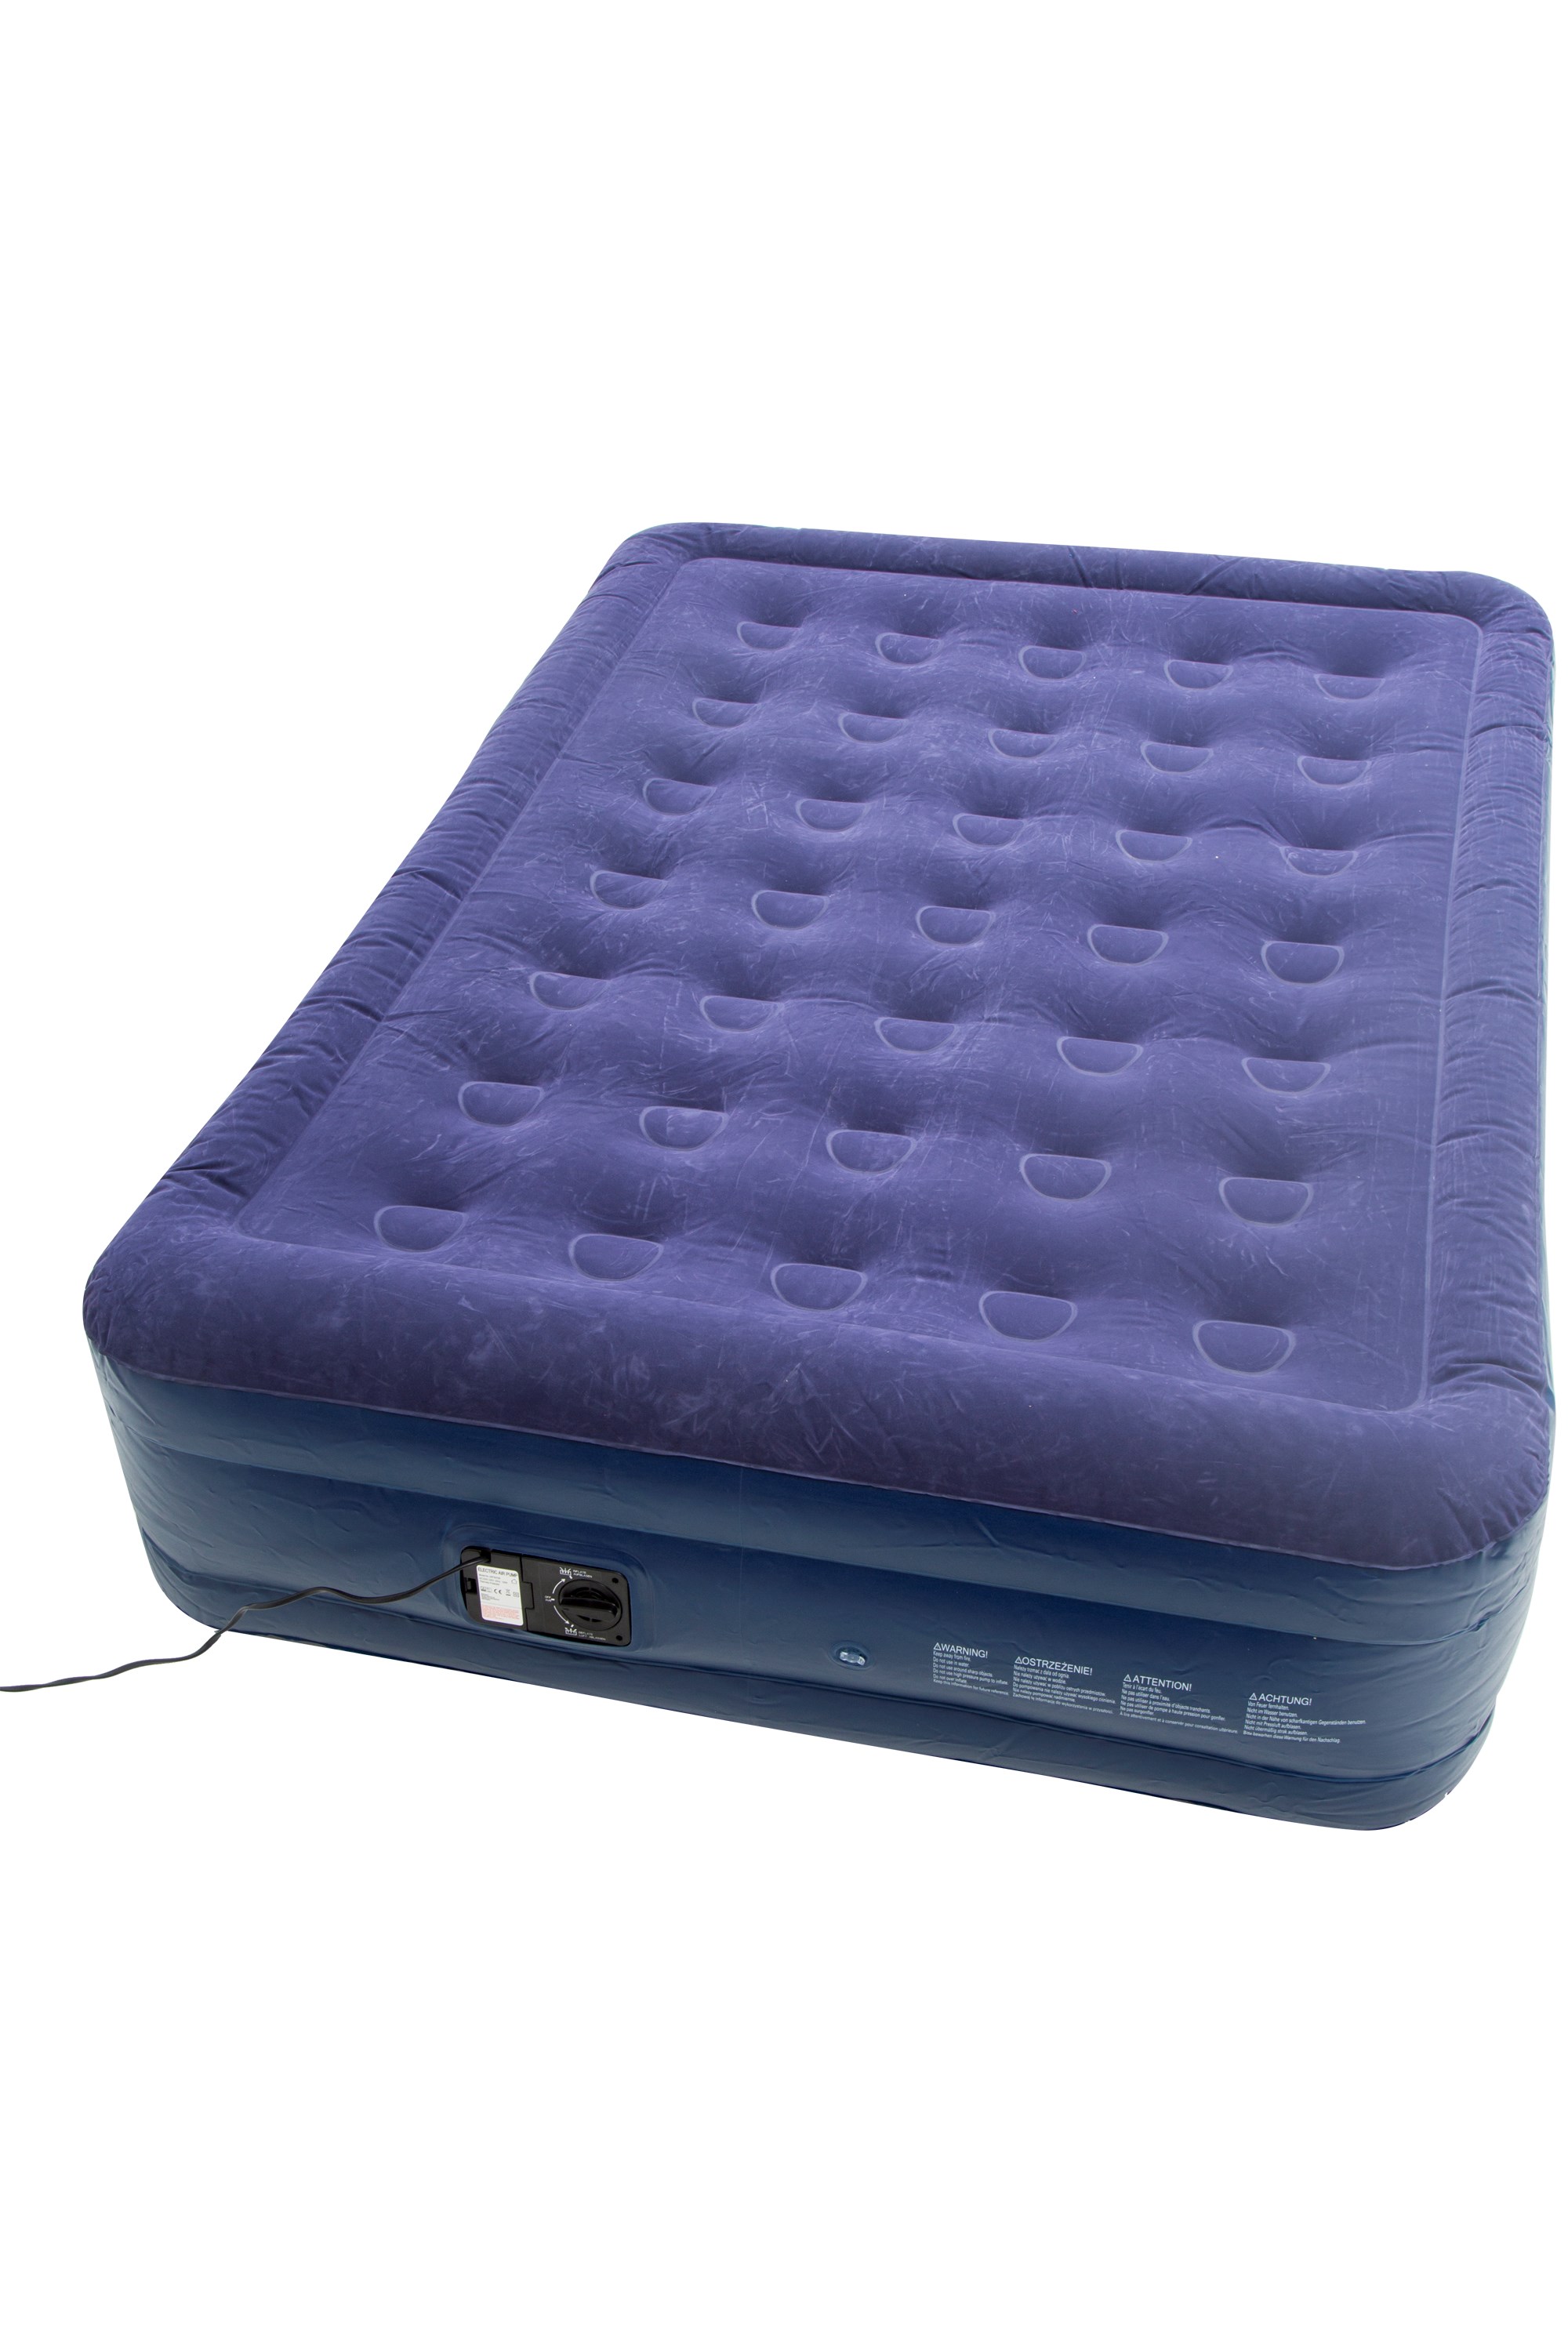 Double-Raised Air bed with In-Built Pump - Blue